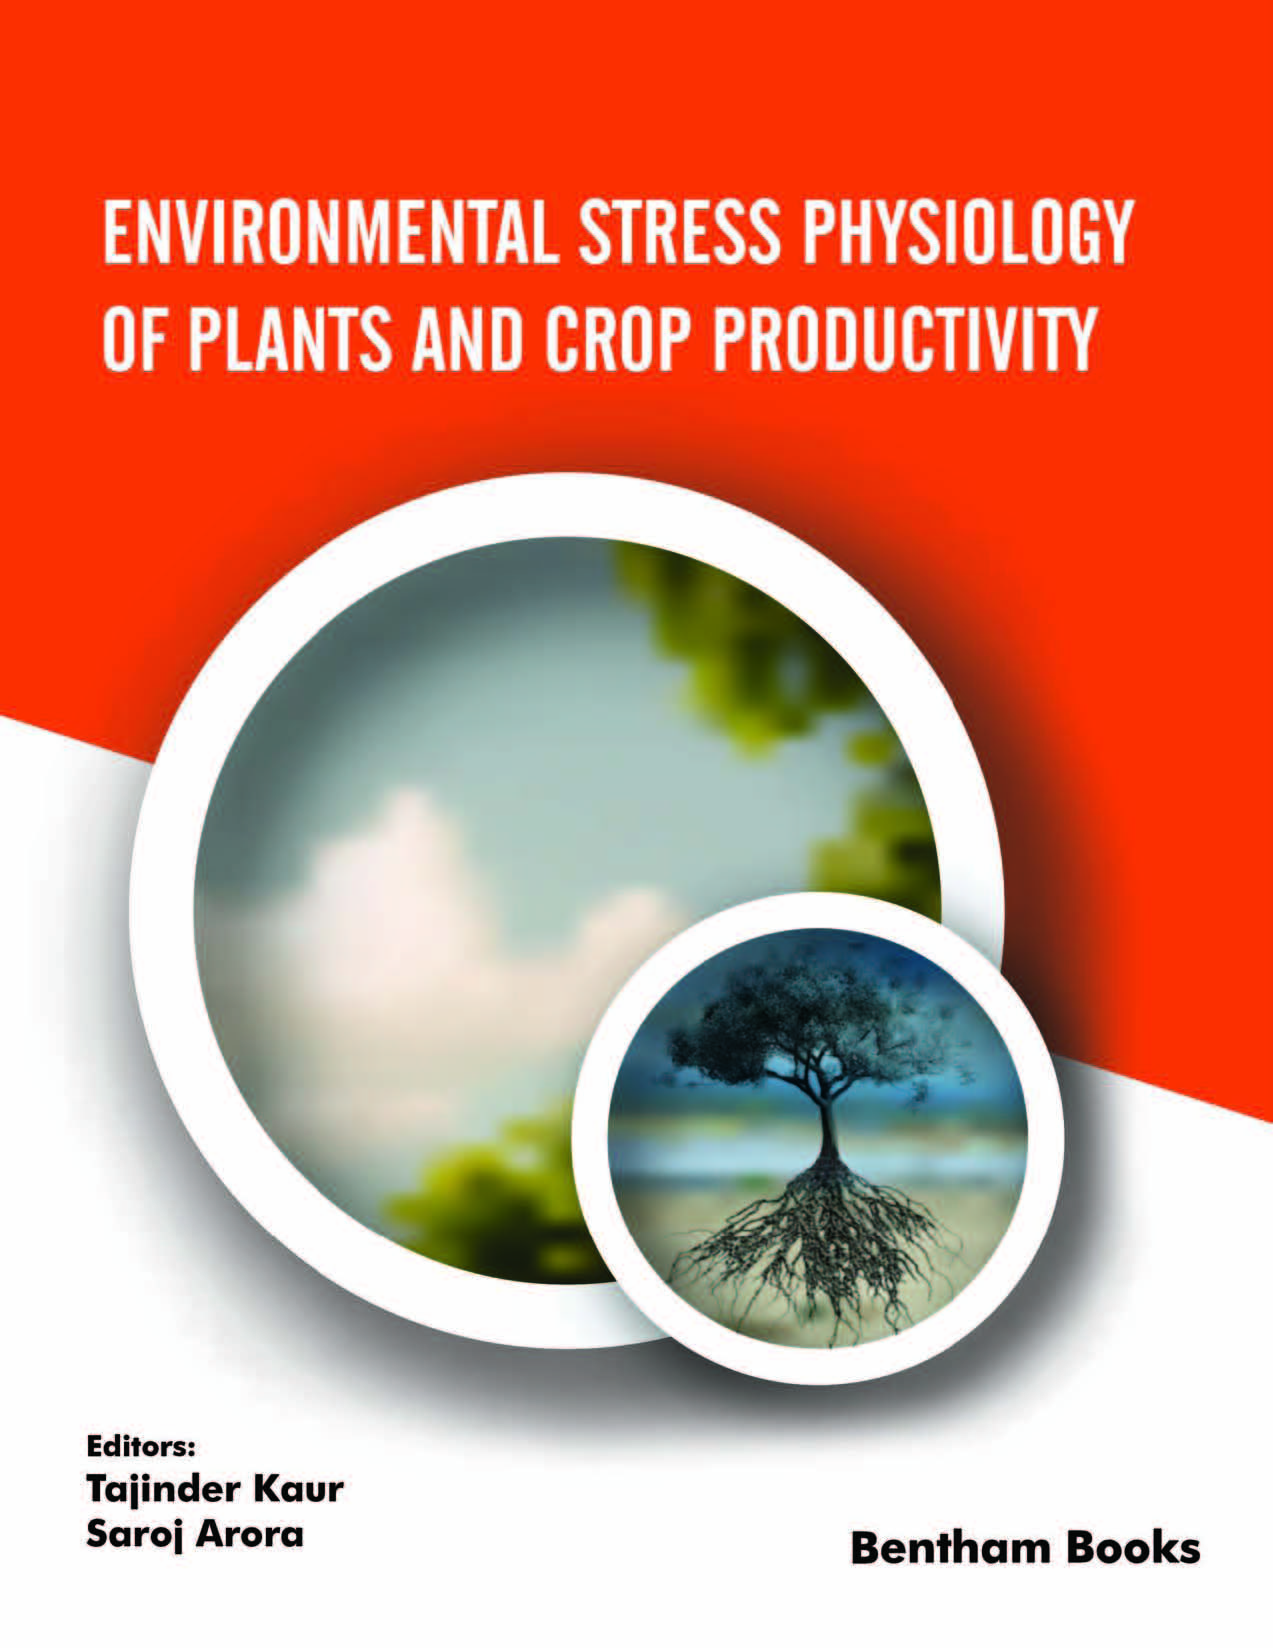 Environmental Stress Physiology of Plants and Crop Productivity